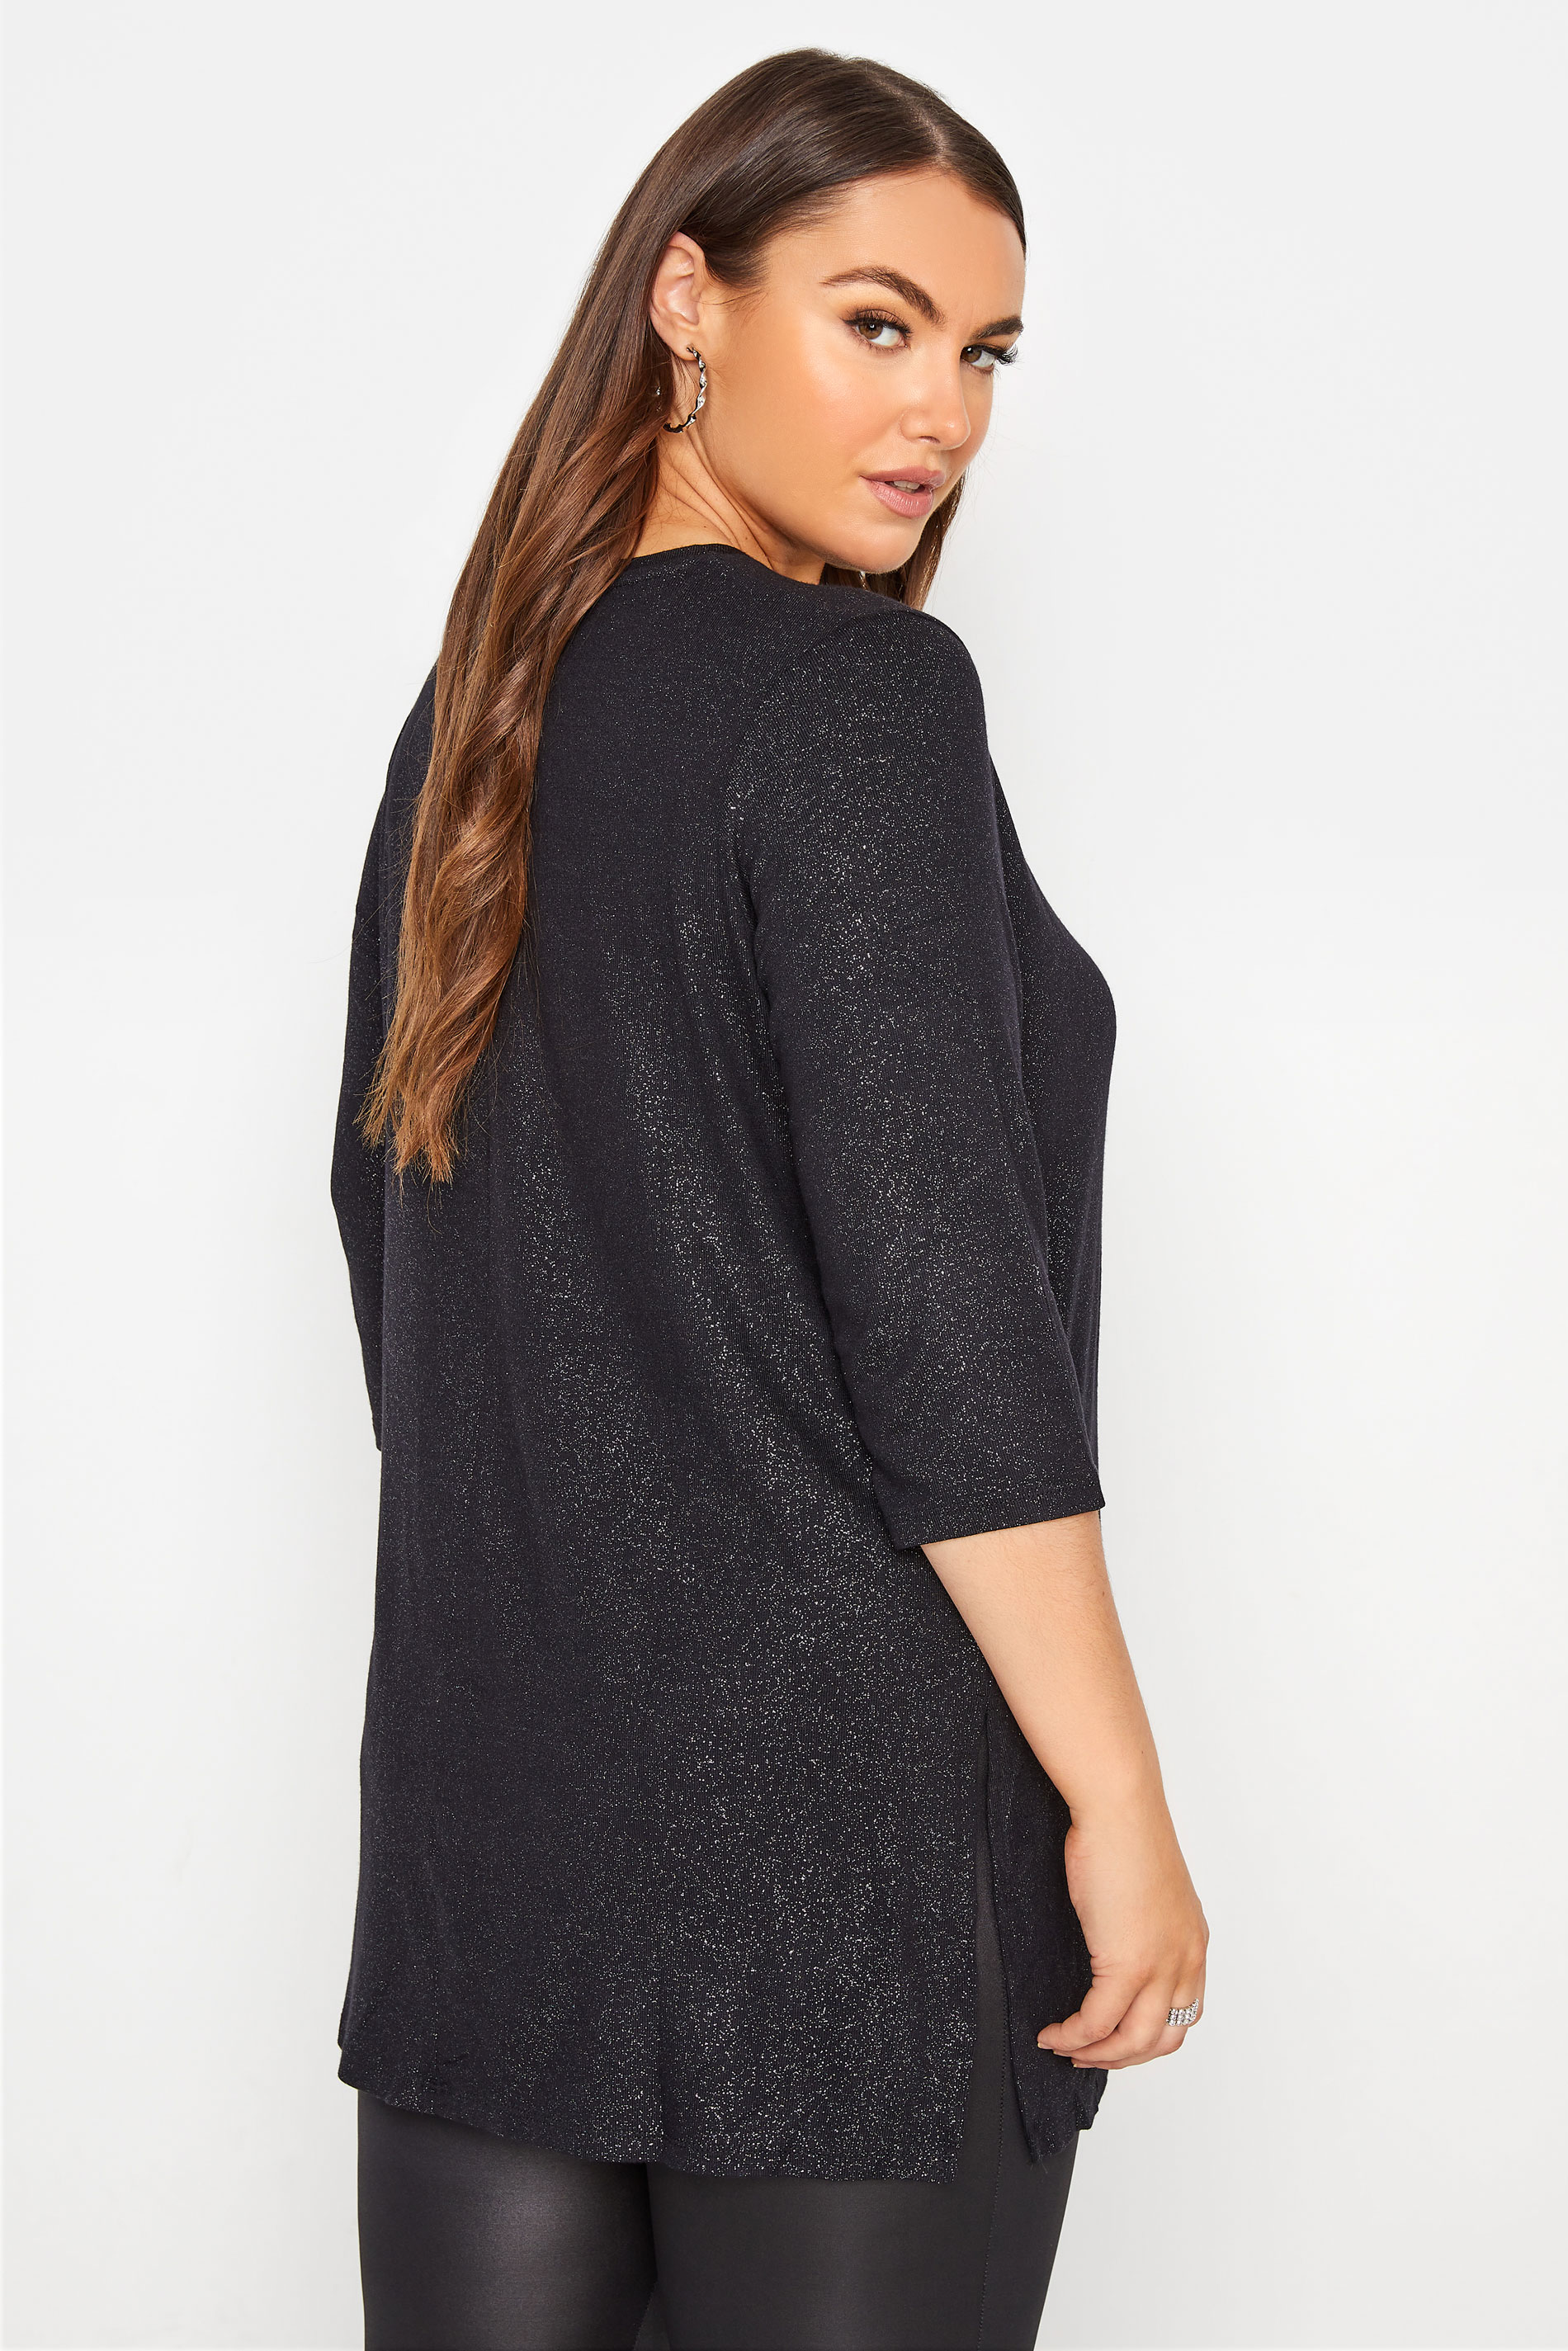 Plus Size Black Foil Print Swing Top | Yours Clothing 3